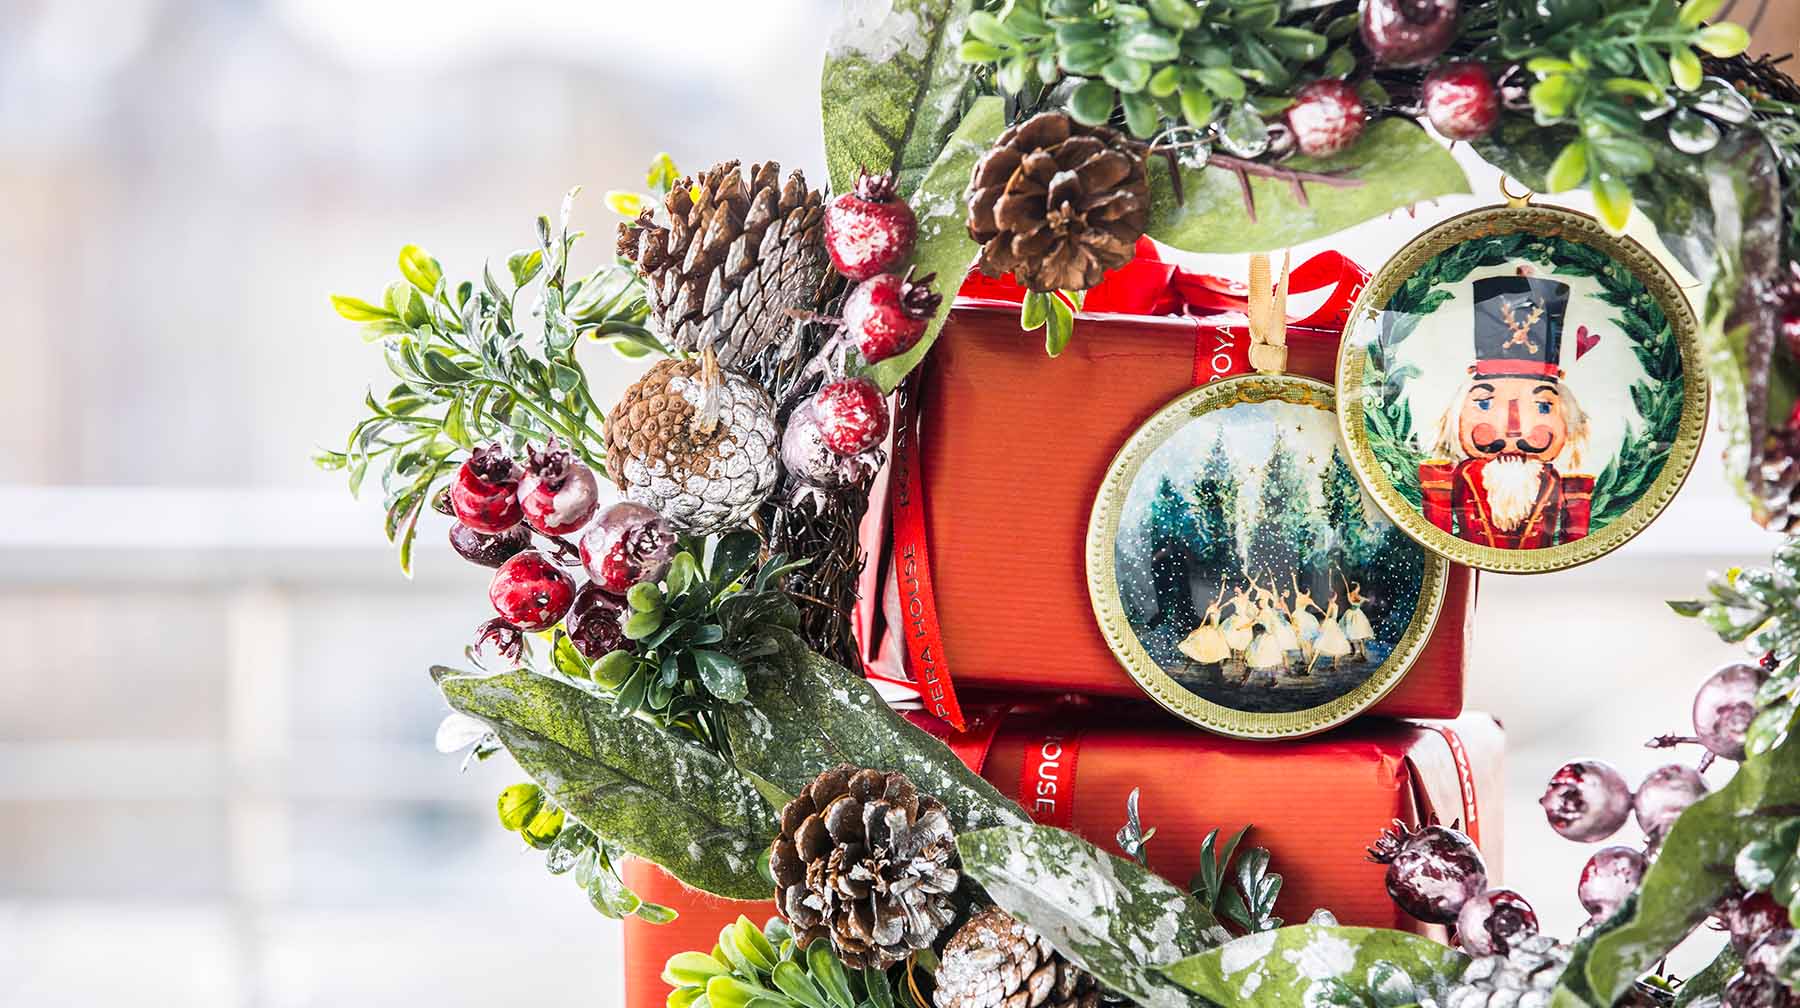 Two Christmas decorations hanging from a wreath in front of a stack of wrapped red gifts.